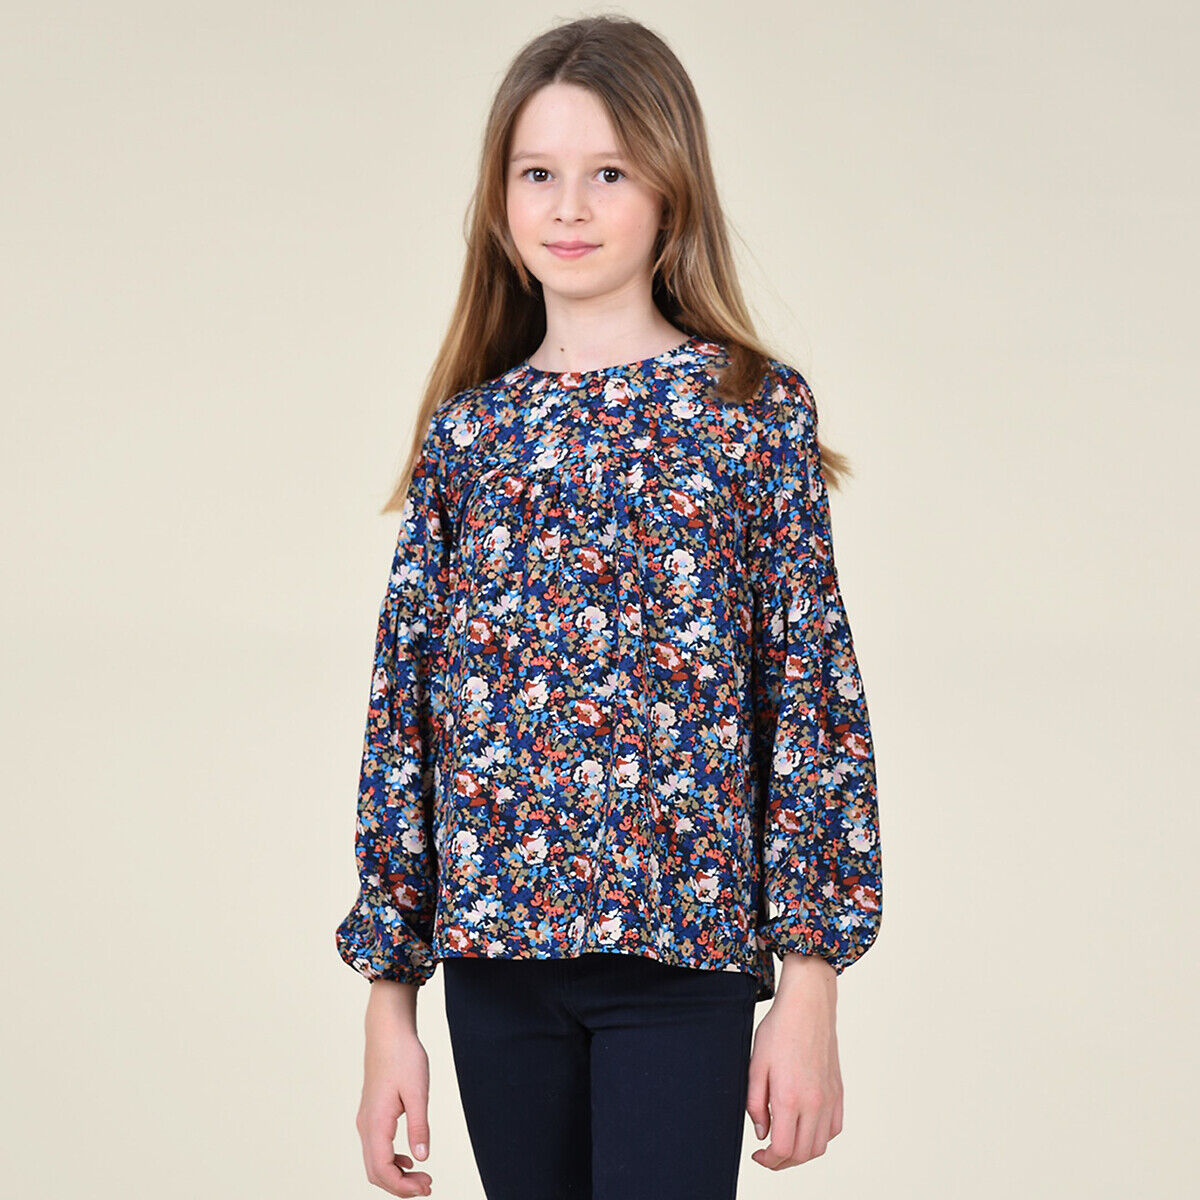 MINI MOLLY Bluse, runder Ausschnitt, florales Muster, 8 - 16 Jahre ANDERE